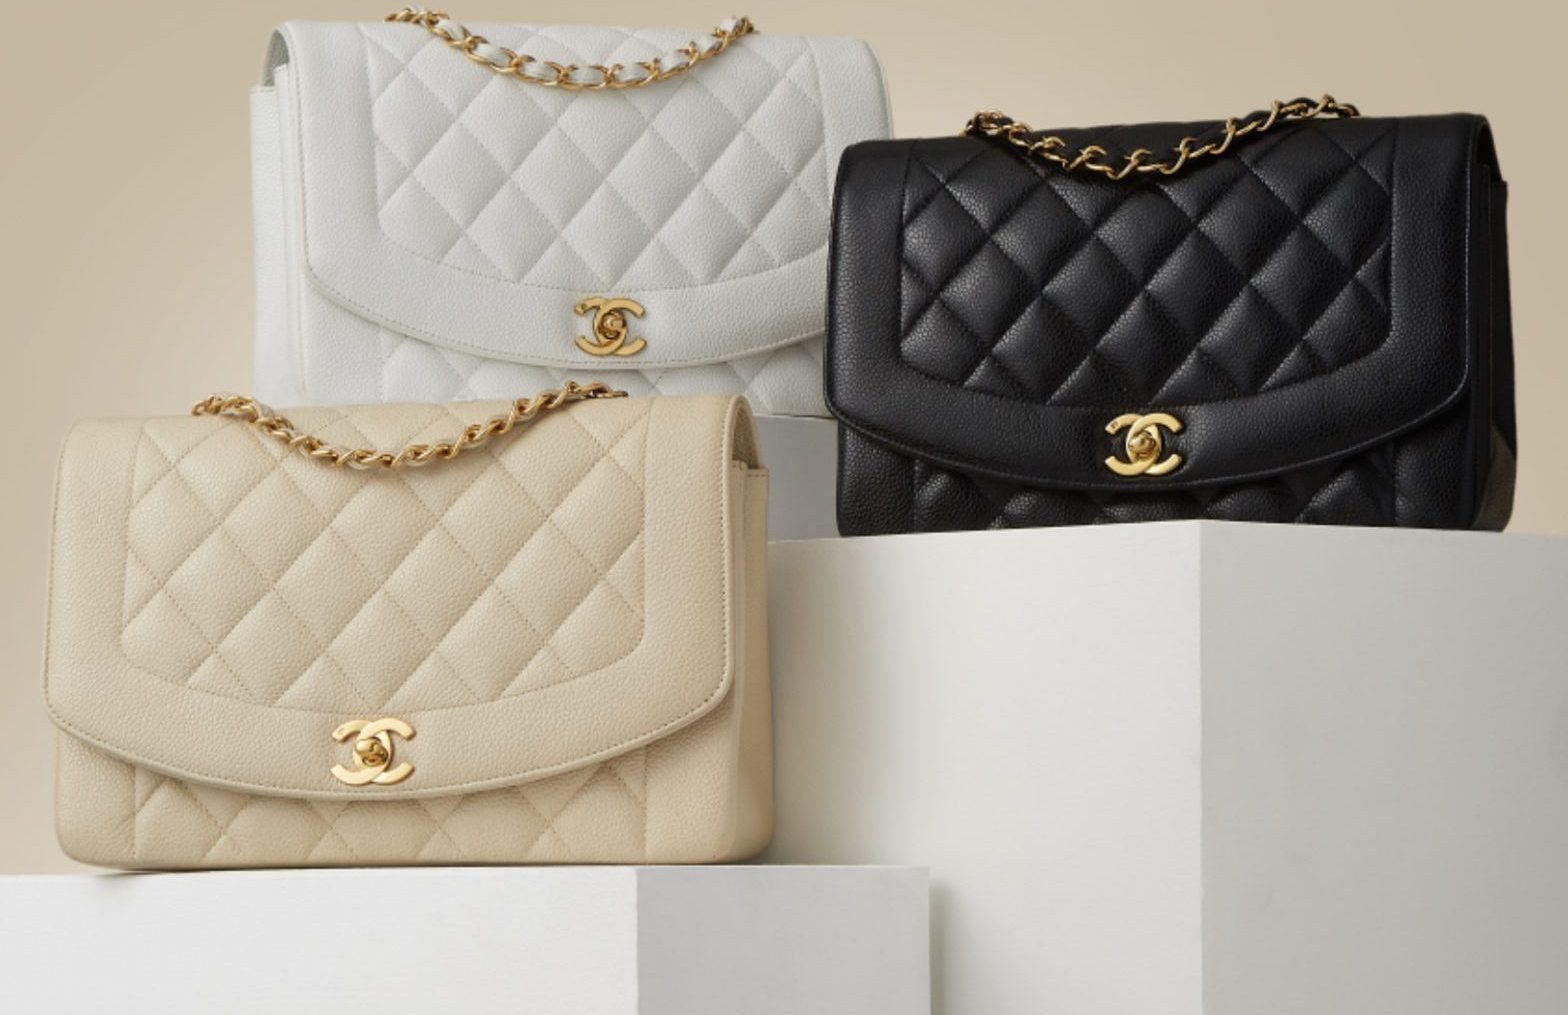 JCPenney Handbags & Purses * EXTRA 25% OFF With COUPON